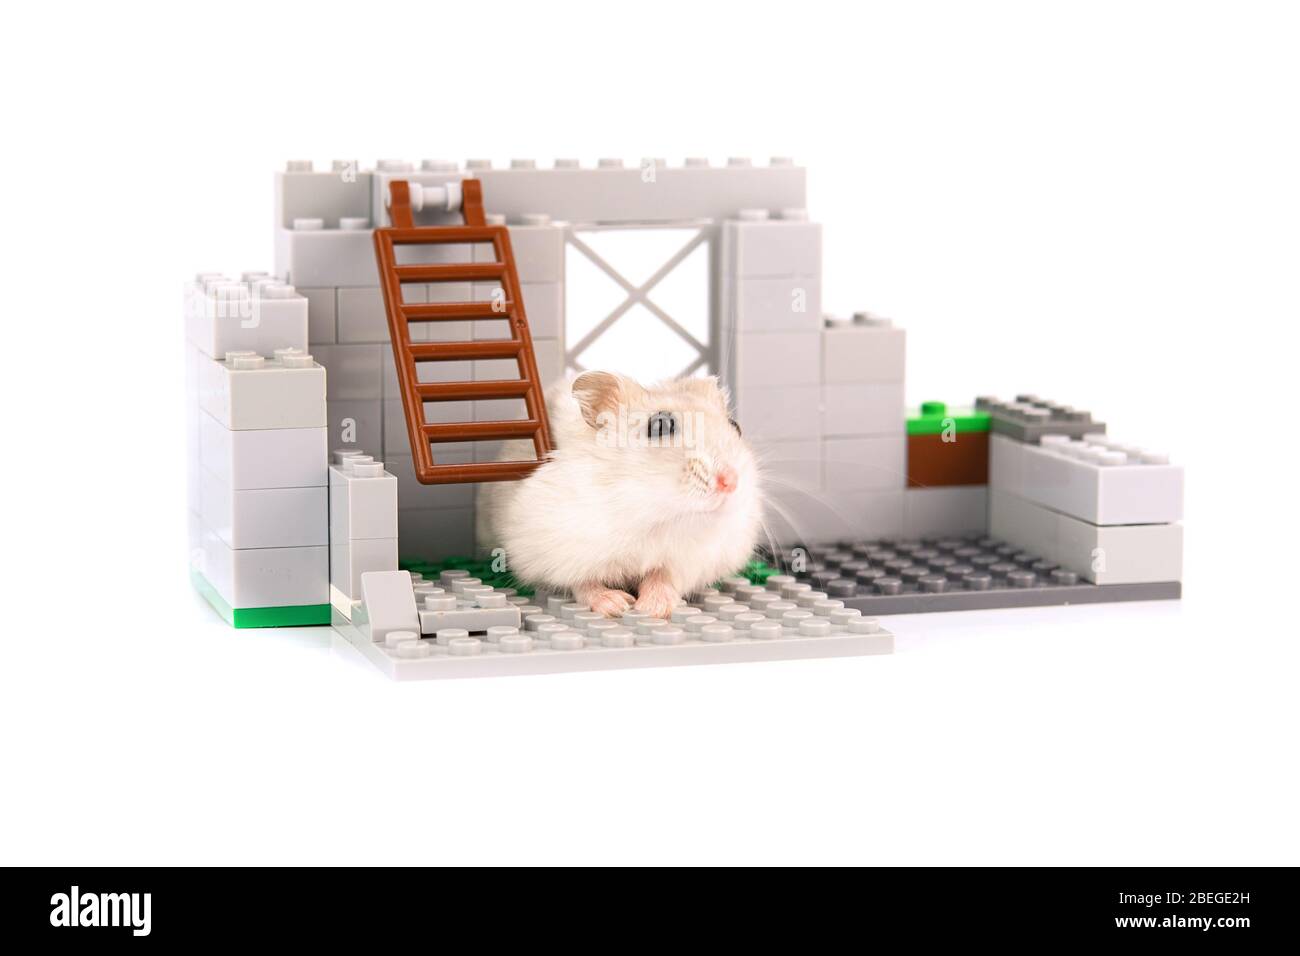 hamster looks out the window at the house Stock Photo